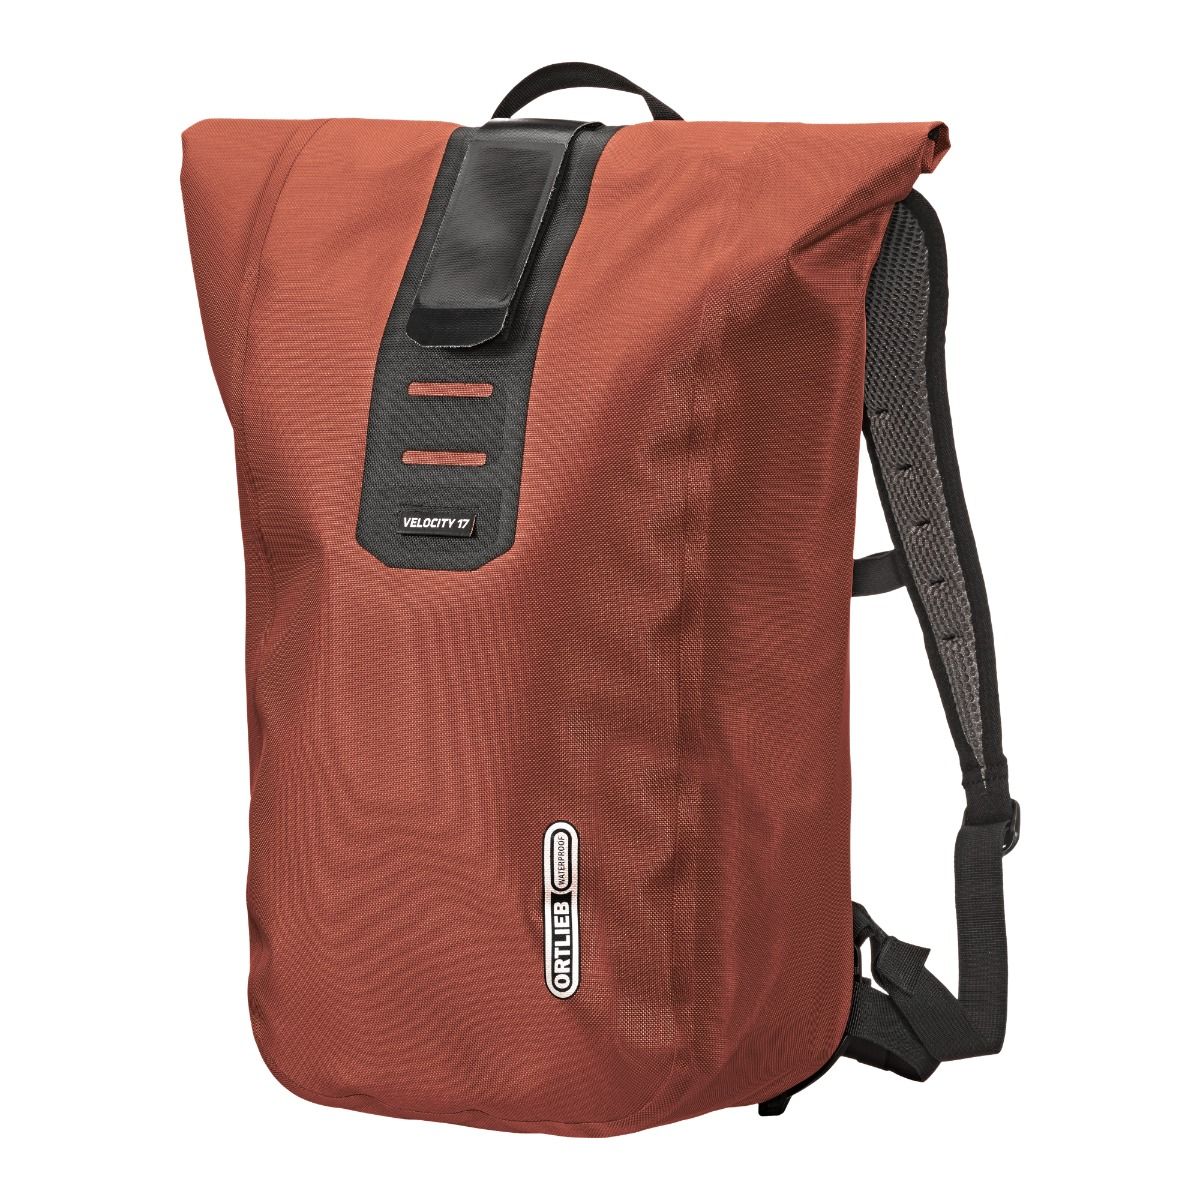 ORTLIEB Velocity PS 17L - rooibos